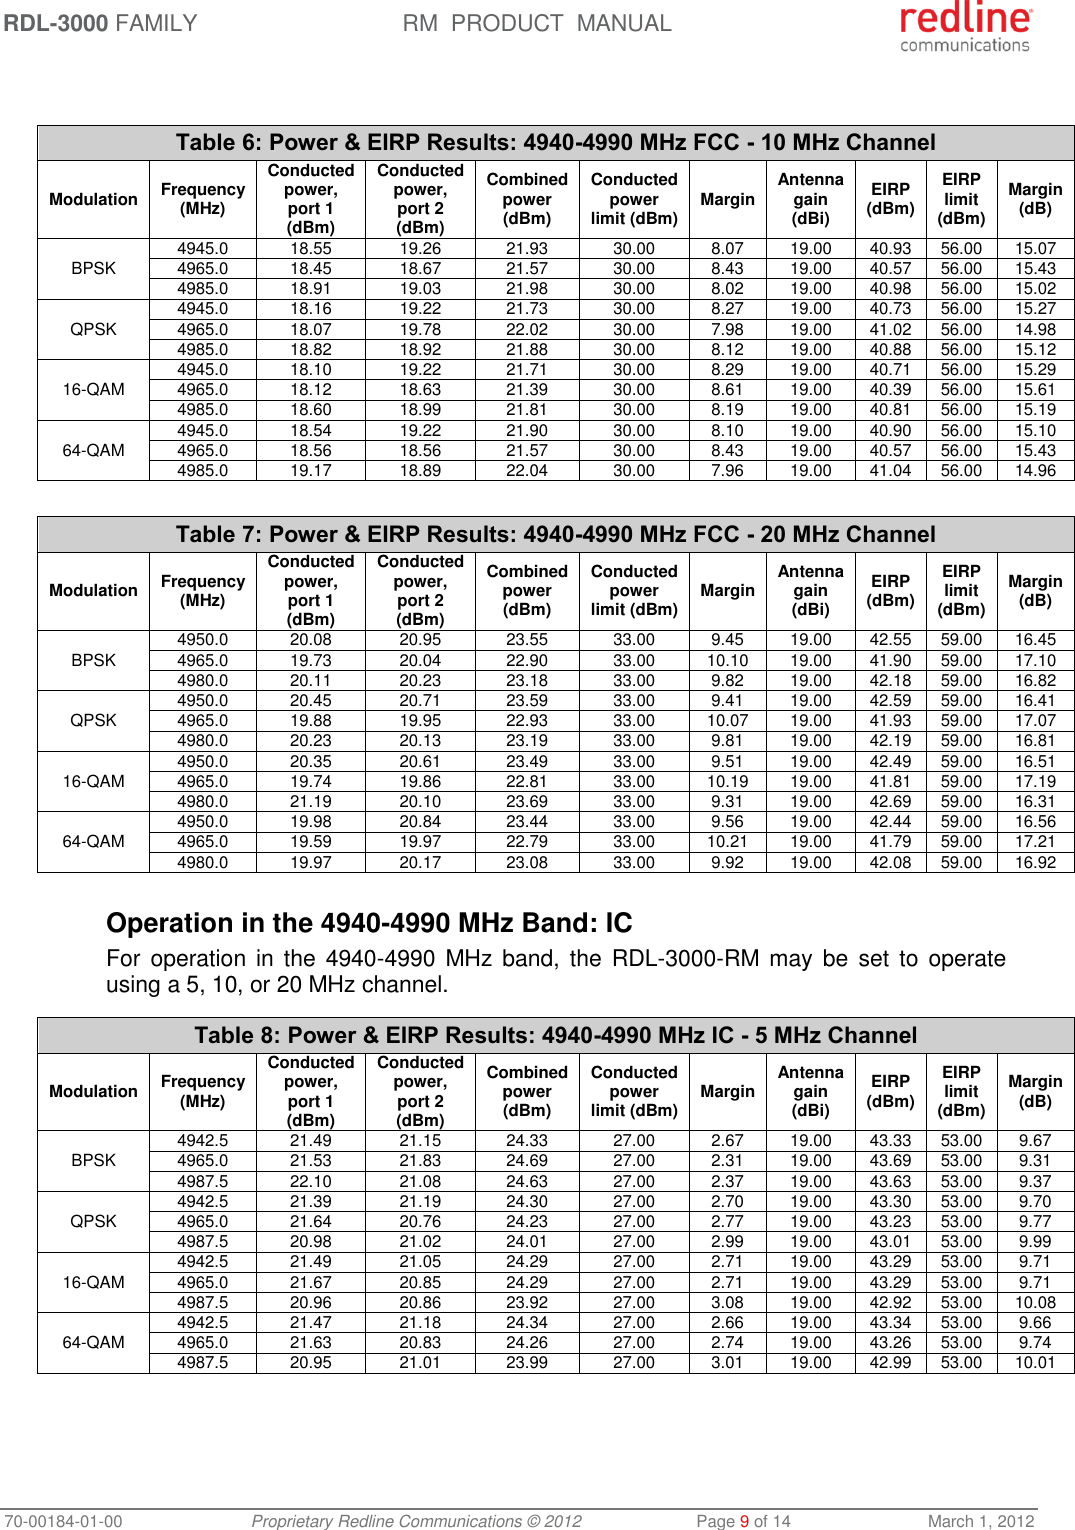 RDL-3000 FAMILY RM  PRODUCT  MANUAL 70-00184-01-00 Proprietary Redline Communications © 2012  Page 9 of 14  March 1, 2012   Table 6: Power &amp; EIRP Results: 4940-4990 MHz FCC - 10 MHz Channel Modulation Frequency (MHz) Conducted power, port 1 (dBm) Conducted power, port 2 (dBm) Combined power (dBm) Conducted power limit (dBm) Margin Antenna gain (dBi) EIRP (dBm) EIRP limit (dBm) Margin (dB) BPSK   4945.0 18.55 19.26 21.93 30.00 8.07 19.00 40.93 56.00 15.07 4965.0 18.45 18.67 21.57 30.00 8.43 19.00 40.57 56.00 15.43 4985.0 18.91 19.03 21.98 30.00 8.02 19.00 40.98 56.00 15.02 QPSK  4945.0 18.16 19.22 21.73 30.00 8.27 19.00 40.73 56.00 15.27 4965.0 18.07 19.78 22.02 30.00 7.98 19.00 41.02 56.00 14.98 4985.0 18.82 18.92 21.88 30.00 8.12 19.00 40.88 56.00 15.12 16-QAM  4945.0 18.10 19.22 21.71 30.00 8.29 19.00 40.71 56.00 15.29 4965.0 18.12 18.63 21.39 30.00 8.61 19.00 40.39 56.00 15.61 4985.0 18.60 18.99 21.81 30.00 8.19 19.00 40.81 56.00 15.19 64-QAM  4945.0 18.54 19.22 21.90 30.00 8.10 19.00 40.90 56.00 15.10 4965.0 18.56 18.56 21.57 30.00 8.43 19.00 40.57 56.00 15.43 4985.0 19.17 18.89 22.04 30.00 7.96 19.00 41.04 56.00 14.96  Table 7: Power &amp; EIRP Results: 4940-4990 MHz FCC - 20 MHz Channel Modulation Frequency (MHz) Conducted power, port 1 (dBm) Conducted power, port 2 (dBm) Combined power (dBm) Conducted power limit (dBm) Margin Antenna gain (dBi) EIRP (dBm) EIRP limit (dBm) Margin (dB) BPSK   4950.0 20.08 20.95 23.55 33.00 9.45 19.00 42.55 59.00 16.45 4965.0 19.73 20.04 22.90 33.00 10.10 19.00 41.90 59.00 17.10 4980.0 20.11 20.23 23.18 33.00 9.82 19.00 42.18 59.00 16.82 QPSK  4950.0 20.45 20.71 23.59 33.00 9.41 19.00 42.59 59.00 16.41 4965.0 19.88 19.95 22.93 33.00 10.07 19.00 41.93 59.00 17.07 4980.0 20.23 20.13 23.19 33.00 9.81 19.00 42.19 59.00 16.81 16-QAM  4950.0 20.35 20.61 23.49 33.00 9.51 19.00 42.49 59.00 16.51 4965.0 19.74 19.86 22.81 33.00 10.19 19.00 41.81 59.00 17.19 4980.0 21.19 20.10 23.69 33.00 9.31 19.00 42.69 59.00 16.31 64-QAM  4950.0 19.98 20.84 23.44 33.00 9.56 19.00 42.44 59.00 16.56 4965.0 19.59 19.97 22.79 33.00 10.21 19.00 41.79 59.00 17.21 4980.0 19.97 20.17 23.08 33.00 9.92 19.00 42.08 59.00 16.92  Operation in the 4940-4990 MHz Band: IC For  operation  in  the  4940-4990  MHz band,  the  RDL-3000-RM may  be  set  to  operate using a 5, 10, or 20 MHz channel.  Table 8: Power &amp; EIRP Results: 4940-4990 MHz IC - 5 MHz Channel Modulation Frequency (MHz) Conducted power, port 1 (dBm) Conducted power, port 2 (dBm) Combined power (dBm) Conducted power limit (dBm) Margin Antenna gain (dBi) EIRP (dBm) EIRP limit (dBm) Margin (dB) BPSK   4942.5 21.49 21.15 24.33 27.00 2.67 19.00 43.33 53.00 9.67 4965.0 21.53 21.83 24.69 27.00 2.31 19.00 43.69 53.00 9.31 4987.5 22.10 21.08 24.63 27.00 2.37 19.00 43.63 53.00 9.37 QPSK  4942.5 21.39 21.19 24.30 27.00 2.70 19.00 43.30 53.00 9.70 4965.0 21.64 20.76 24.23 27.00 2.77 19.00 43.23 53.00 9.77 4987.5 20.98 21.02 24.01 27.00 2.99 19.00 43.01 53.00 9.99 16-QAM  4942.5 21.49 21.05 24.29 27.00 2.71 19.00 43.29 53.00 9.71 4965.0 21.67 20.85 24.29 27.00 2.71 19.00 43.29 53.00 9.71 4987.5 20.96 20.86 23.92 27.00 3.08 19.00 42.92 53.00 10.08 64-QAM  4942.5 21.47 21.18 24.34 27.00 2.66 19.00 43.34 53.00 9.66 4965.0 21.63 20.83 24.26 27.00 2.74 19.00 43.26 53.00 9.74 4987.5 20.95 21.01 23.99 27.00 3.01 19.00 42.99 53.00 10.01  